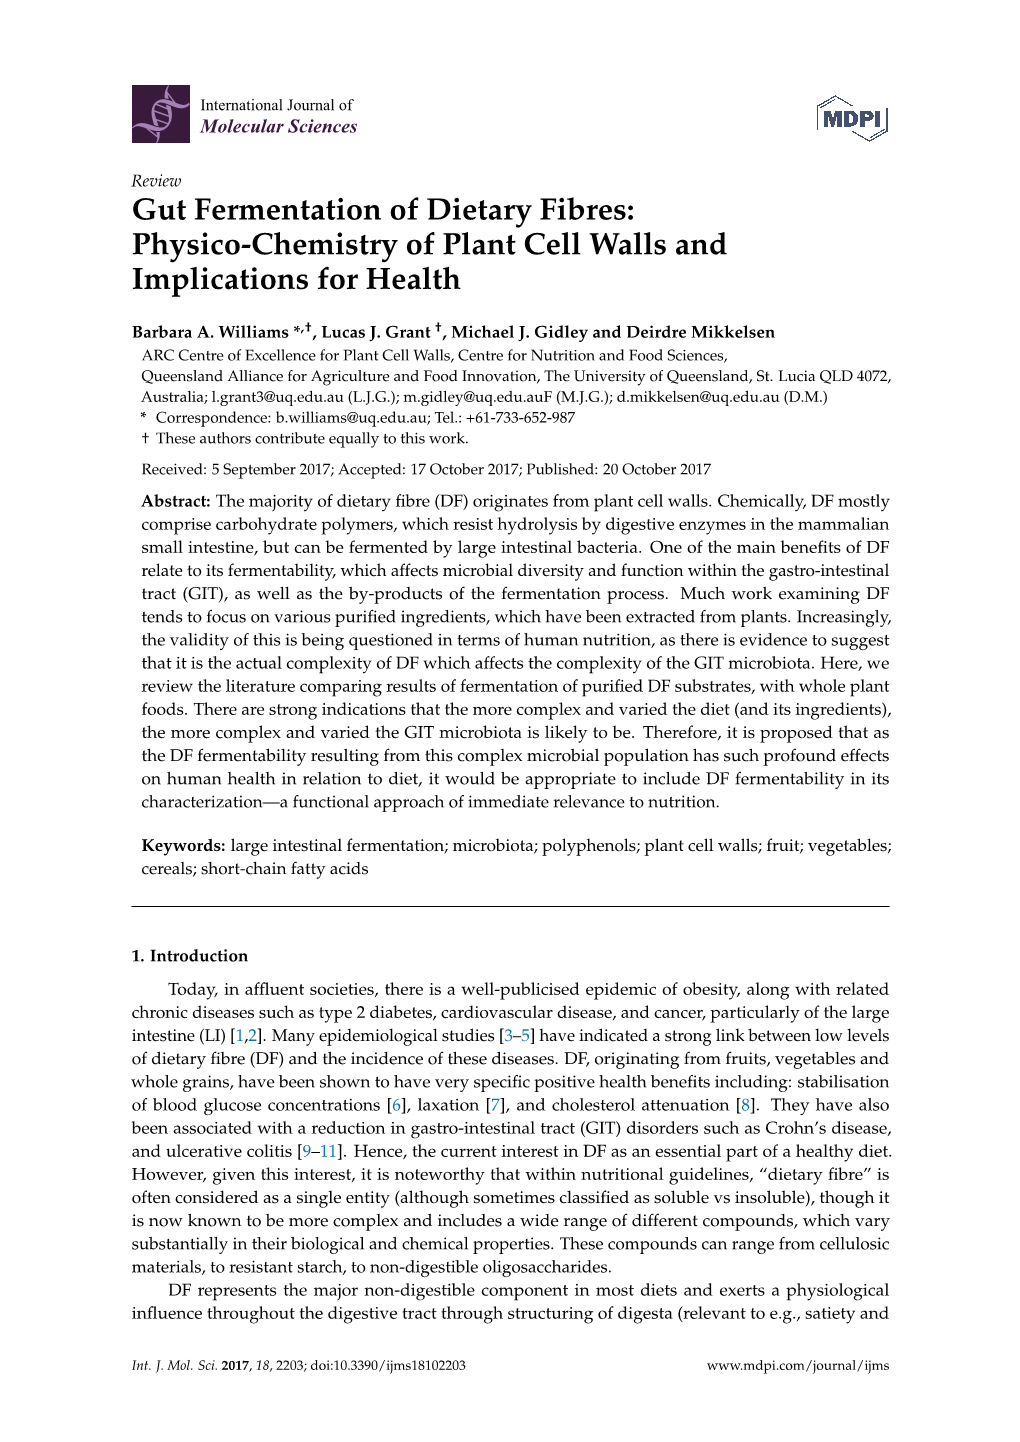 Gut Fermentation of Dietary Fibres: Physico-Chemistry of Plant Cell Walls and Implications for Health